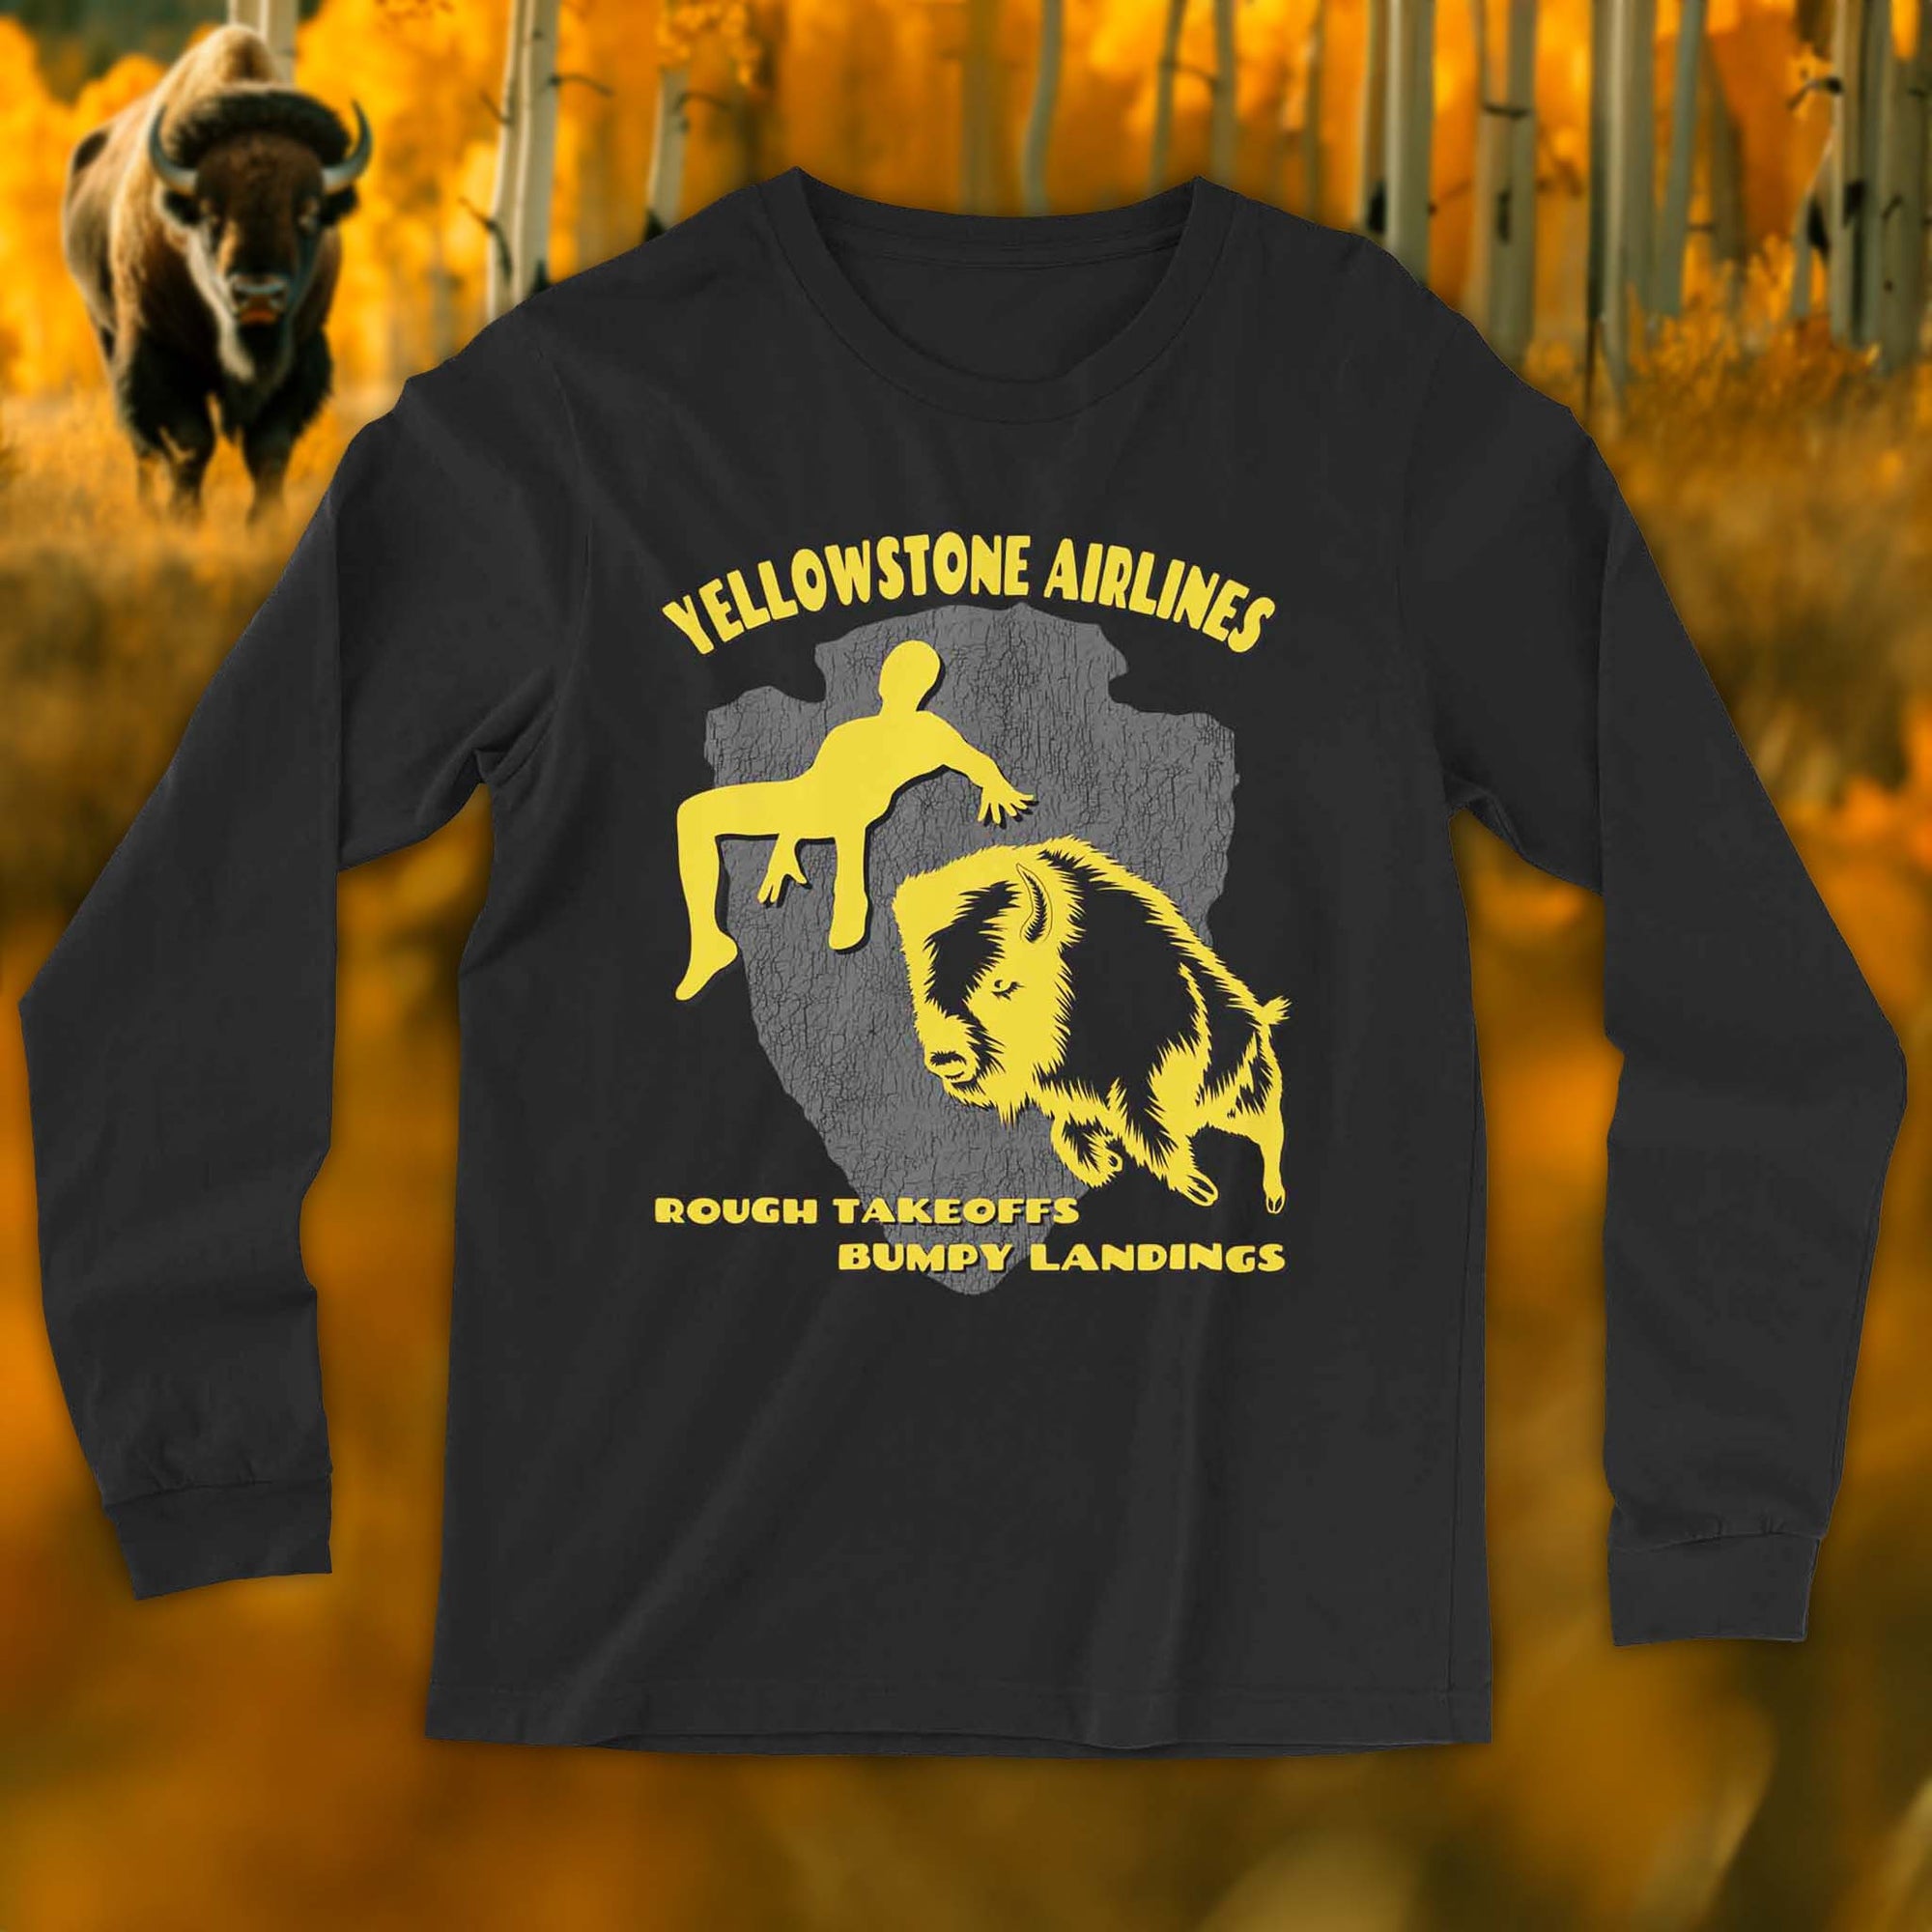 Yellowstone Airlines Long Sleeve T-Shirt